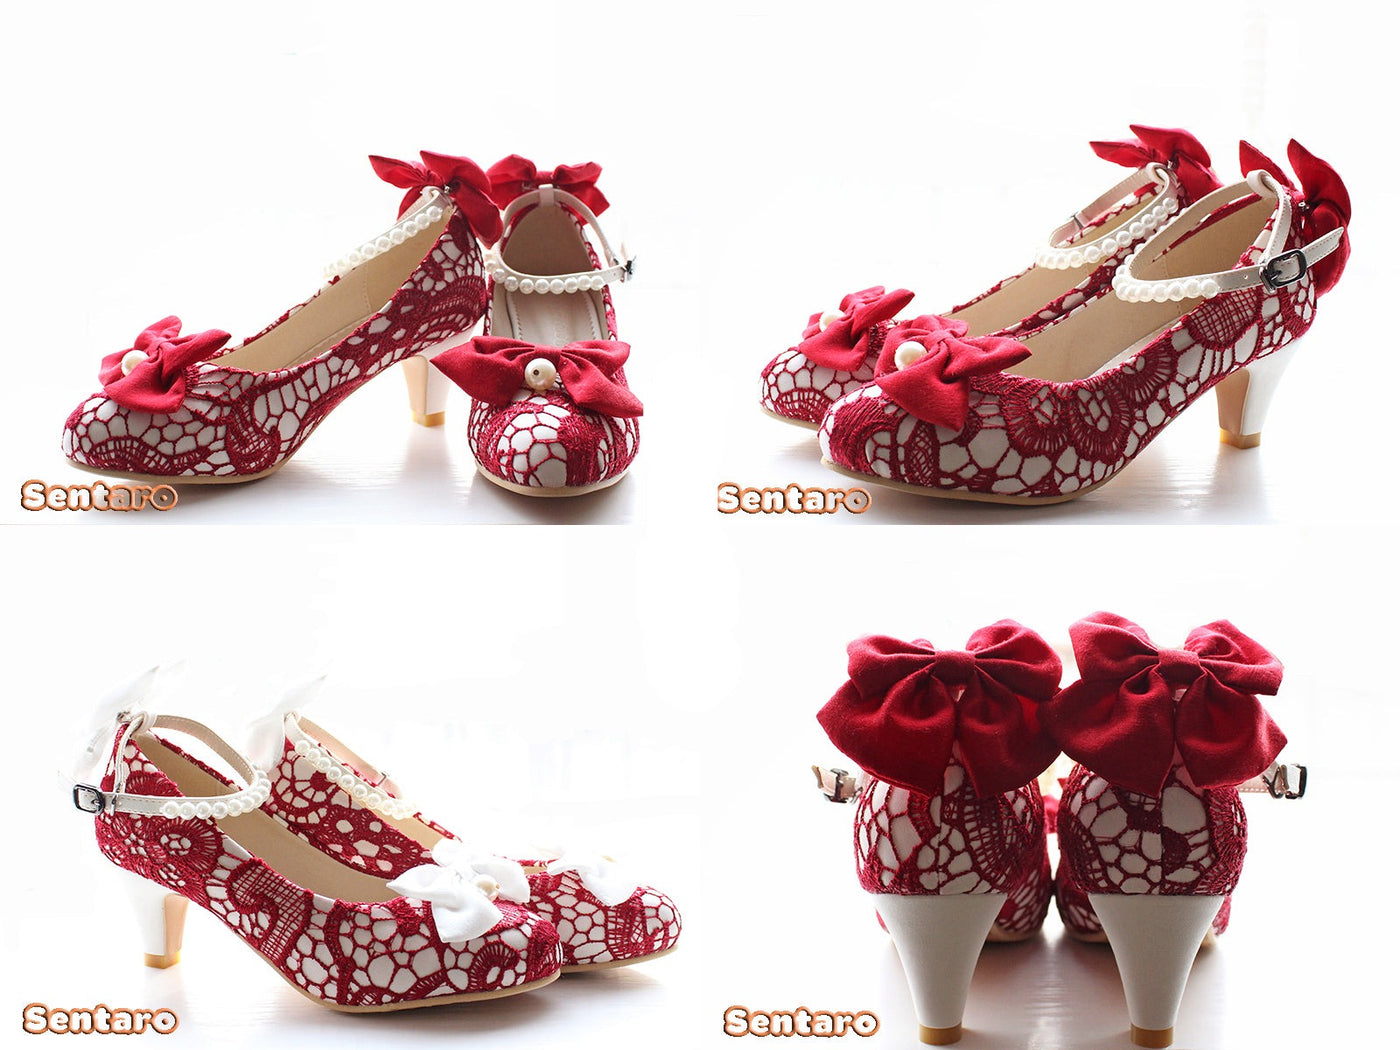 Sentaro Lace Bow Wedding Lolita Shoes Multicolors 36 red with white middle heel 